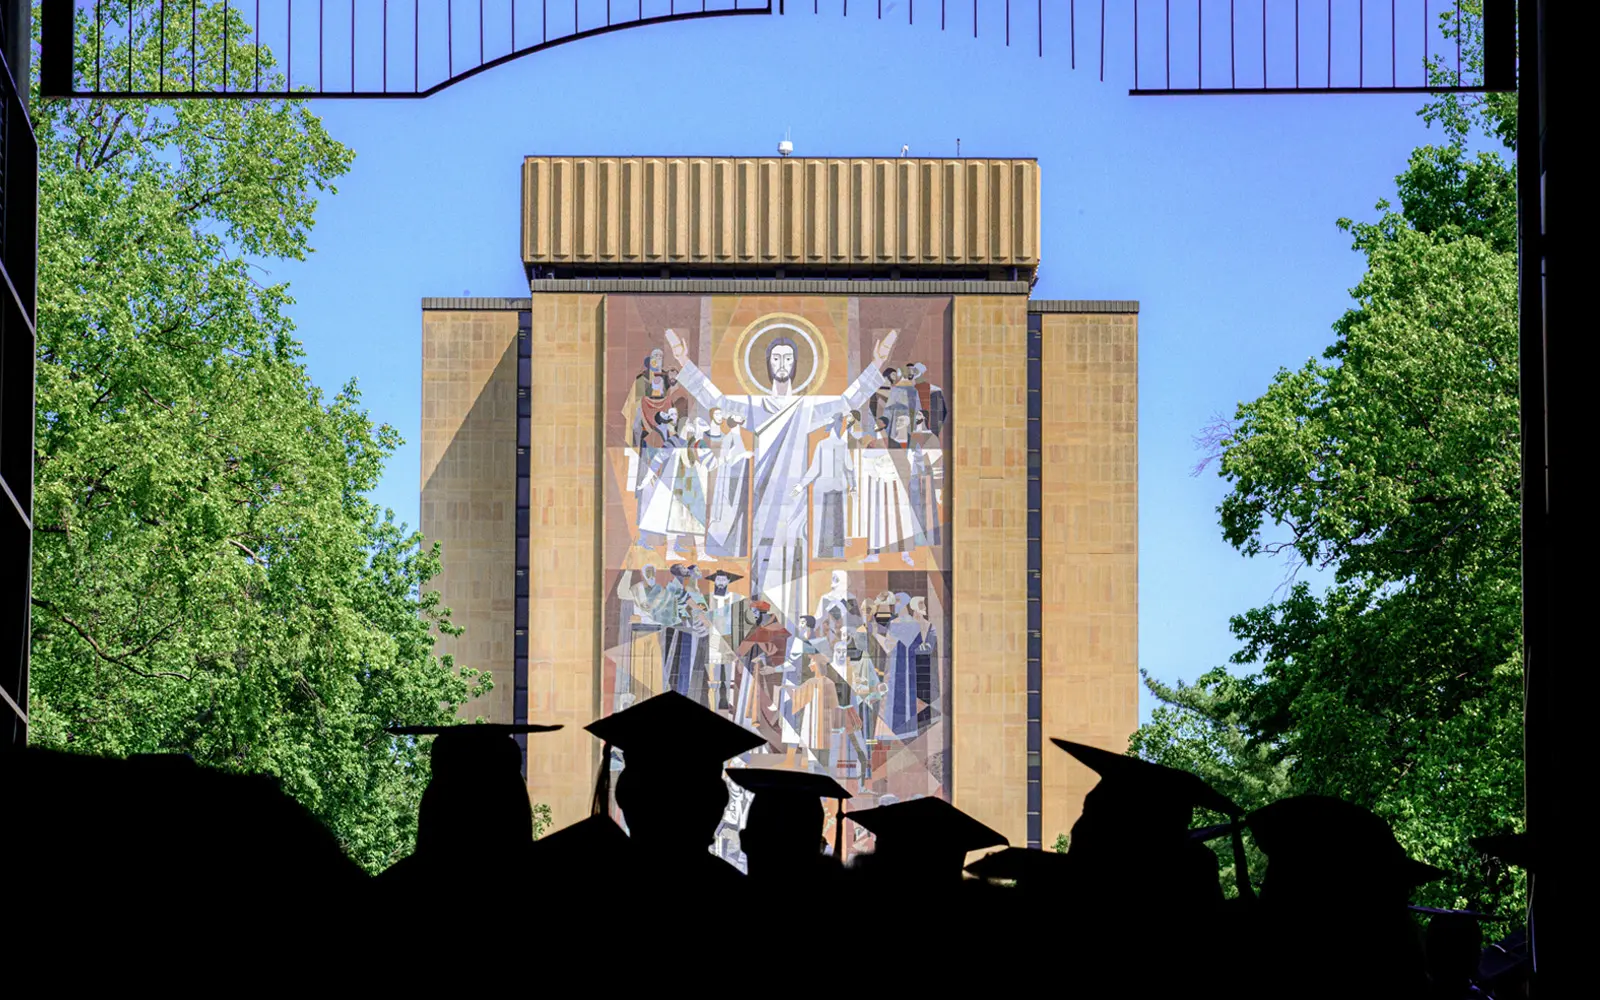 Graduates process from the Stadium entrance towards the Word of Life mural on the Hesburgh Library. 